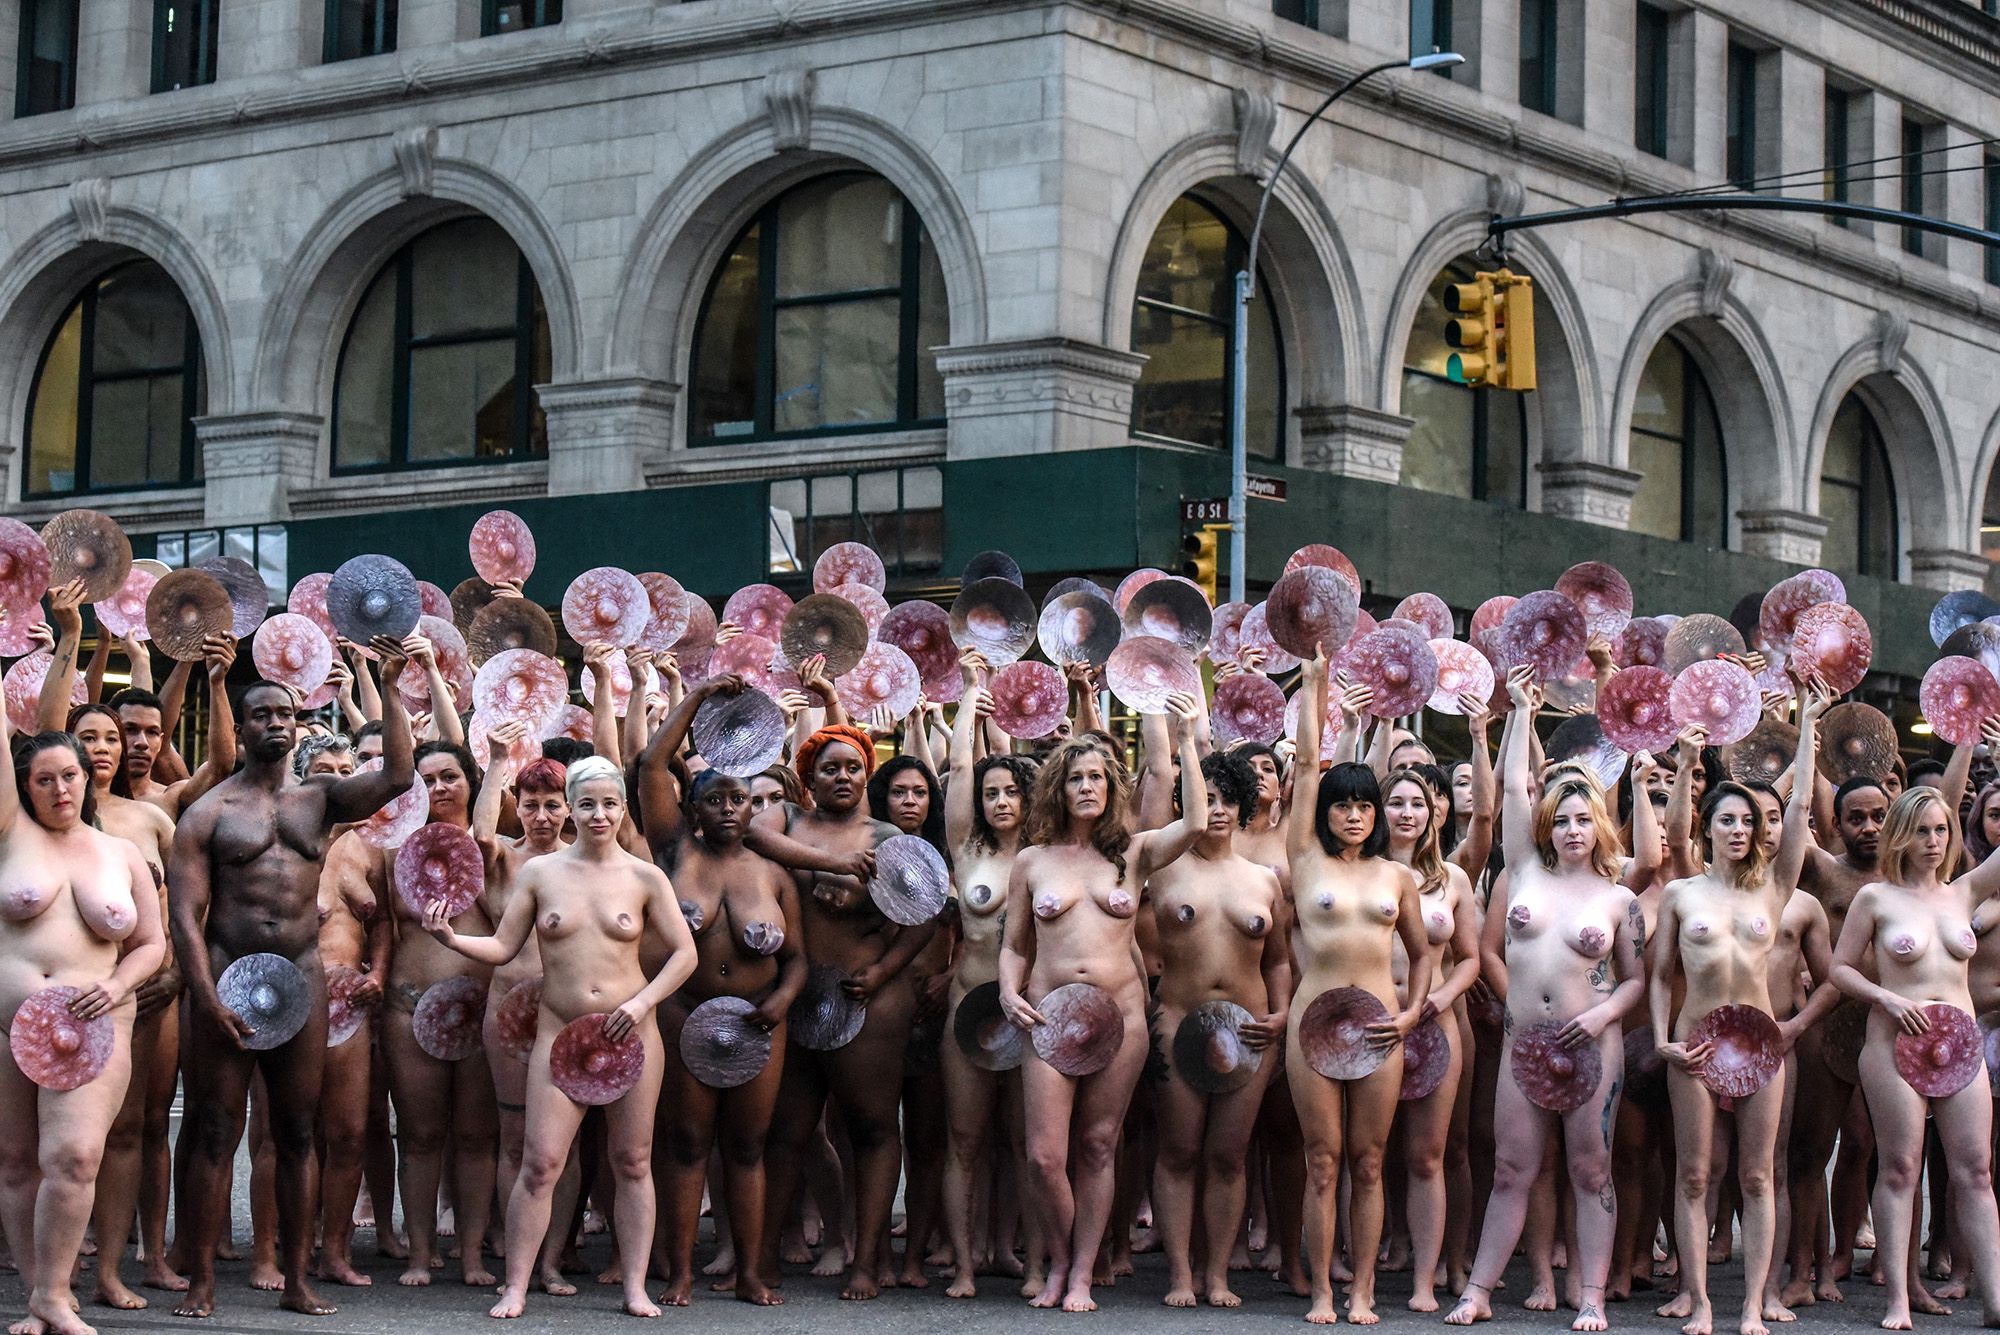 125 People Posed Nude in Front of Facebook's New York Office to Protes...